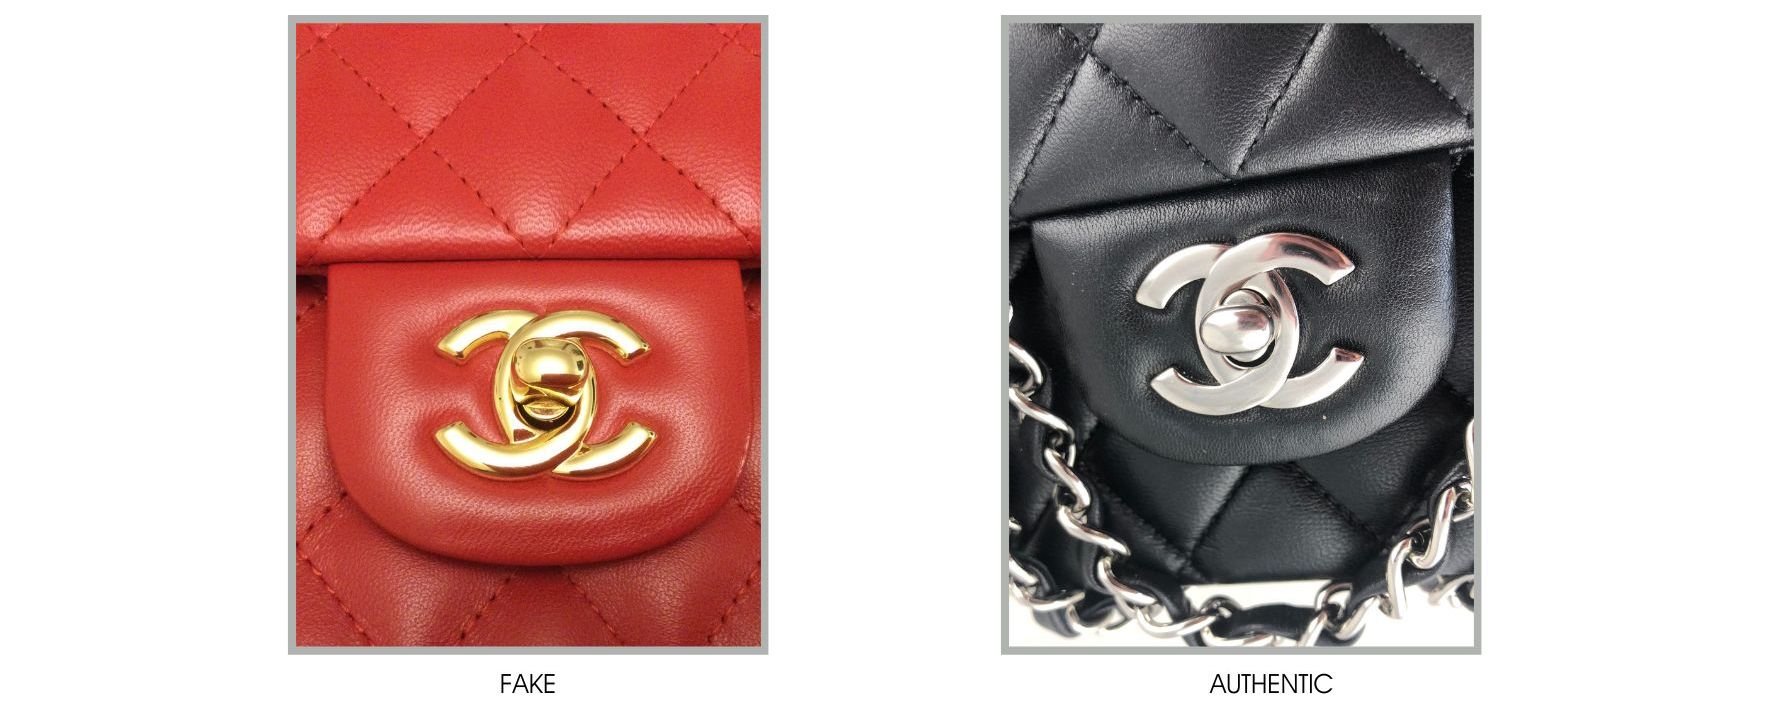 How to Tell if a Chanel Bag is Real